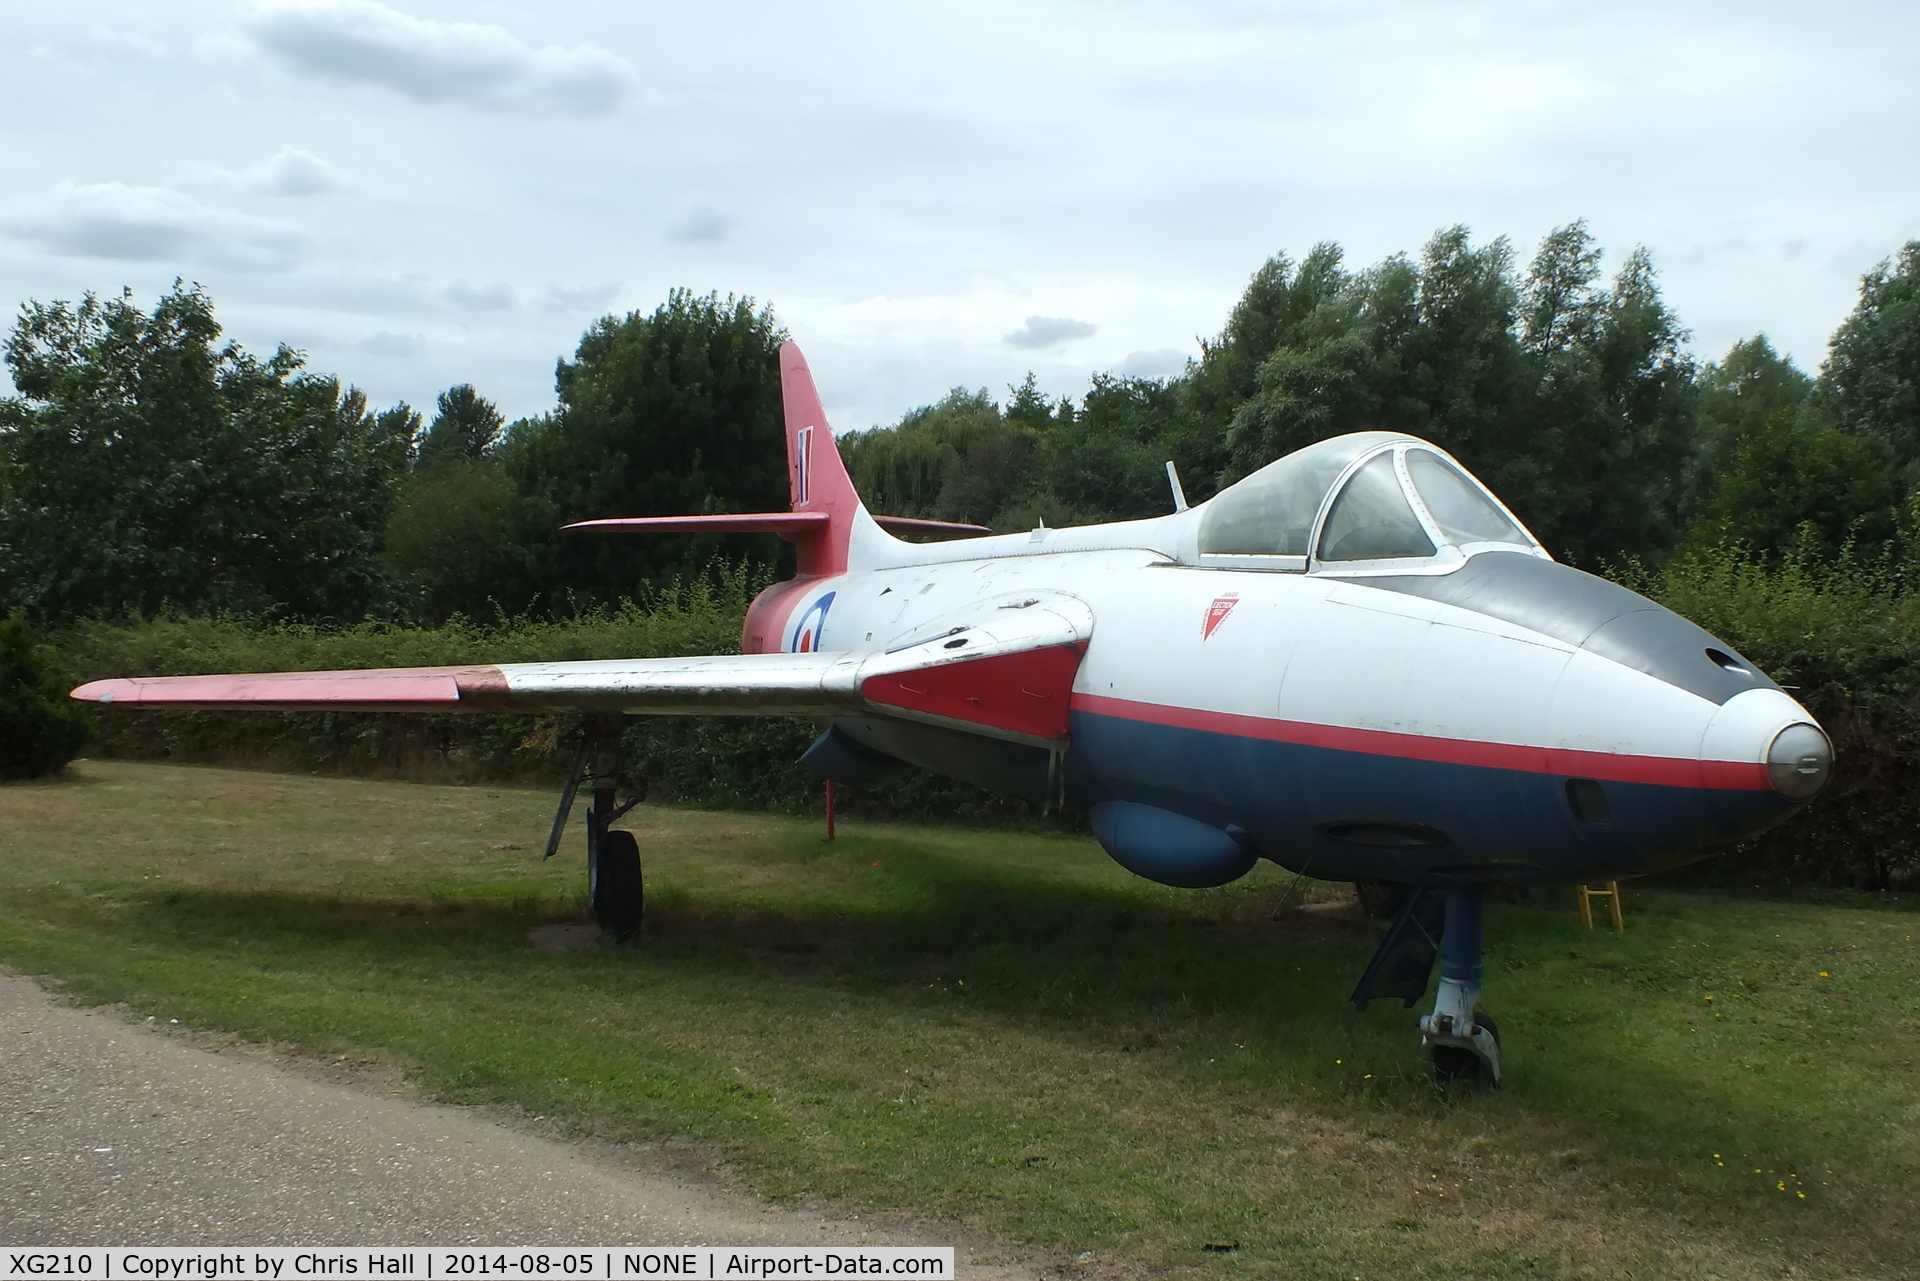 XG210, Hawker Hunter F.6 C/N 41H-680035, Composite Hunter made from the fuselage of XG210 and wings from XL572 and XL623, located at Beck Row, Suffolk